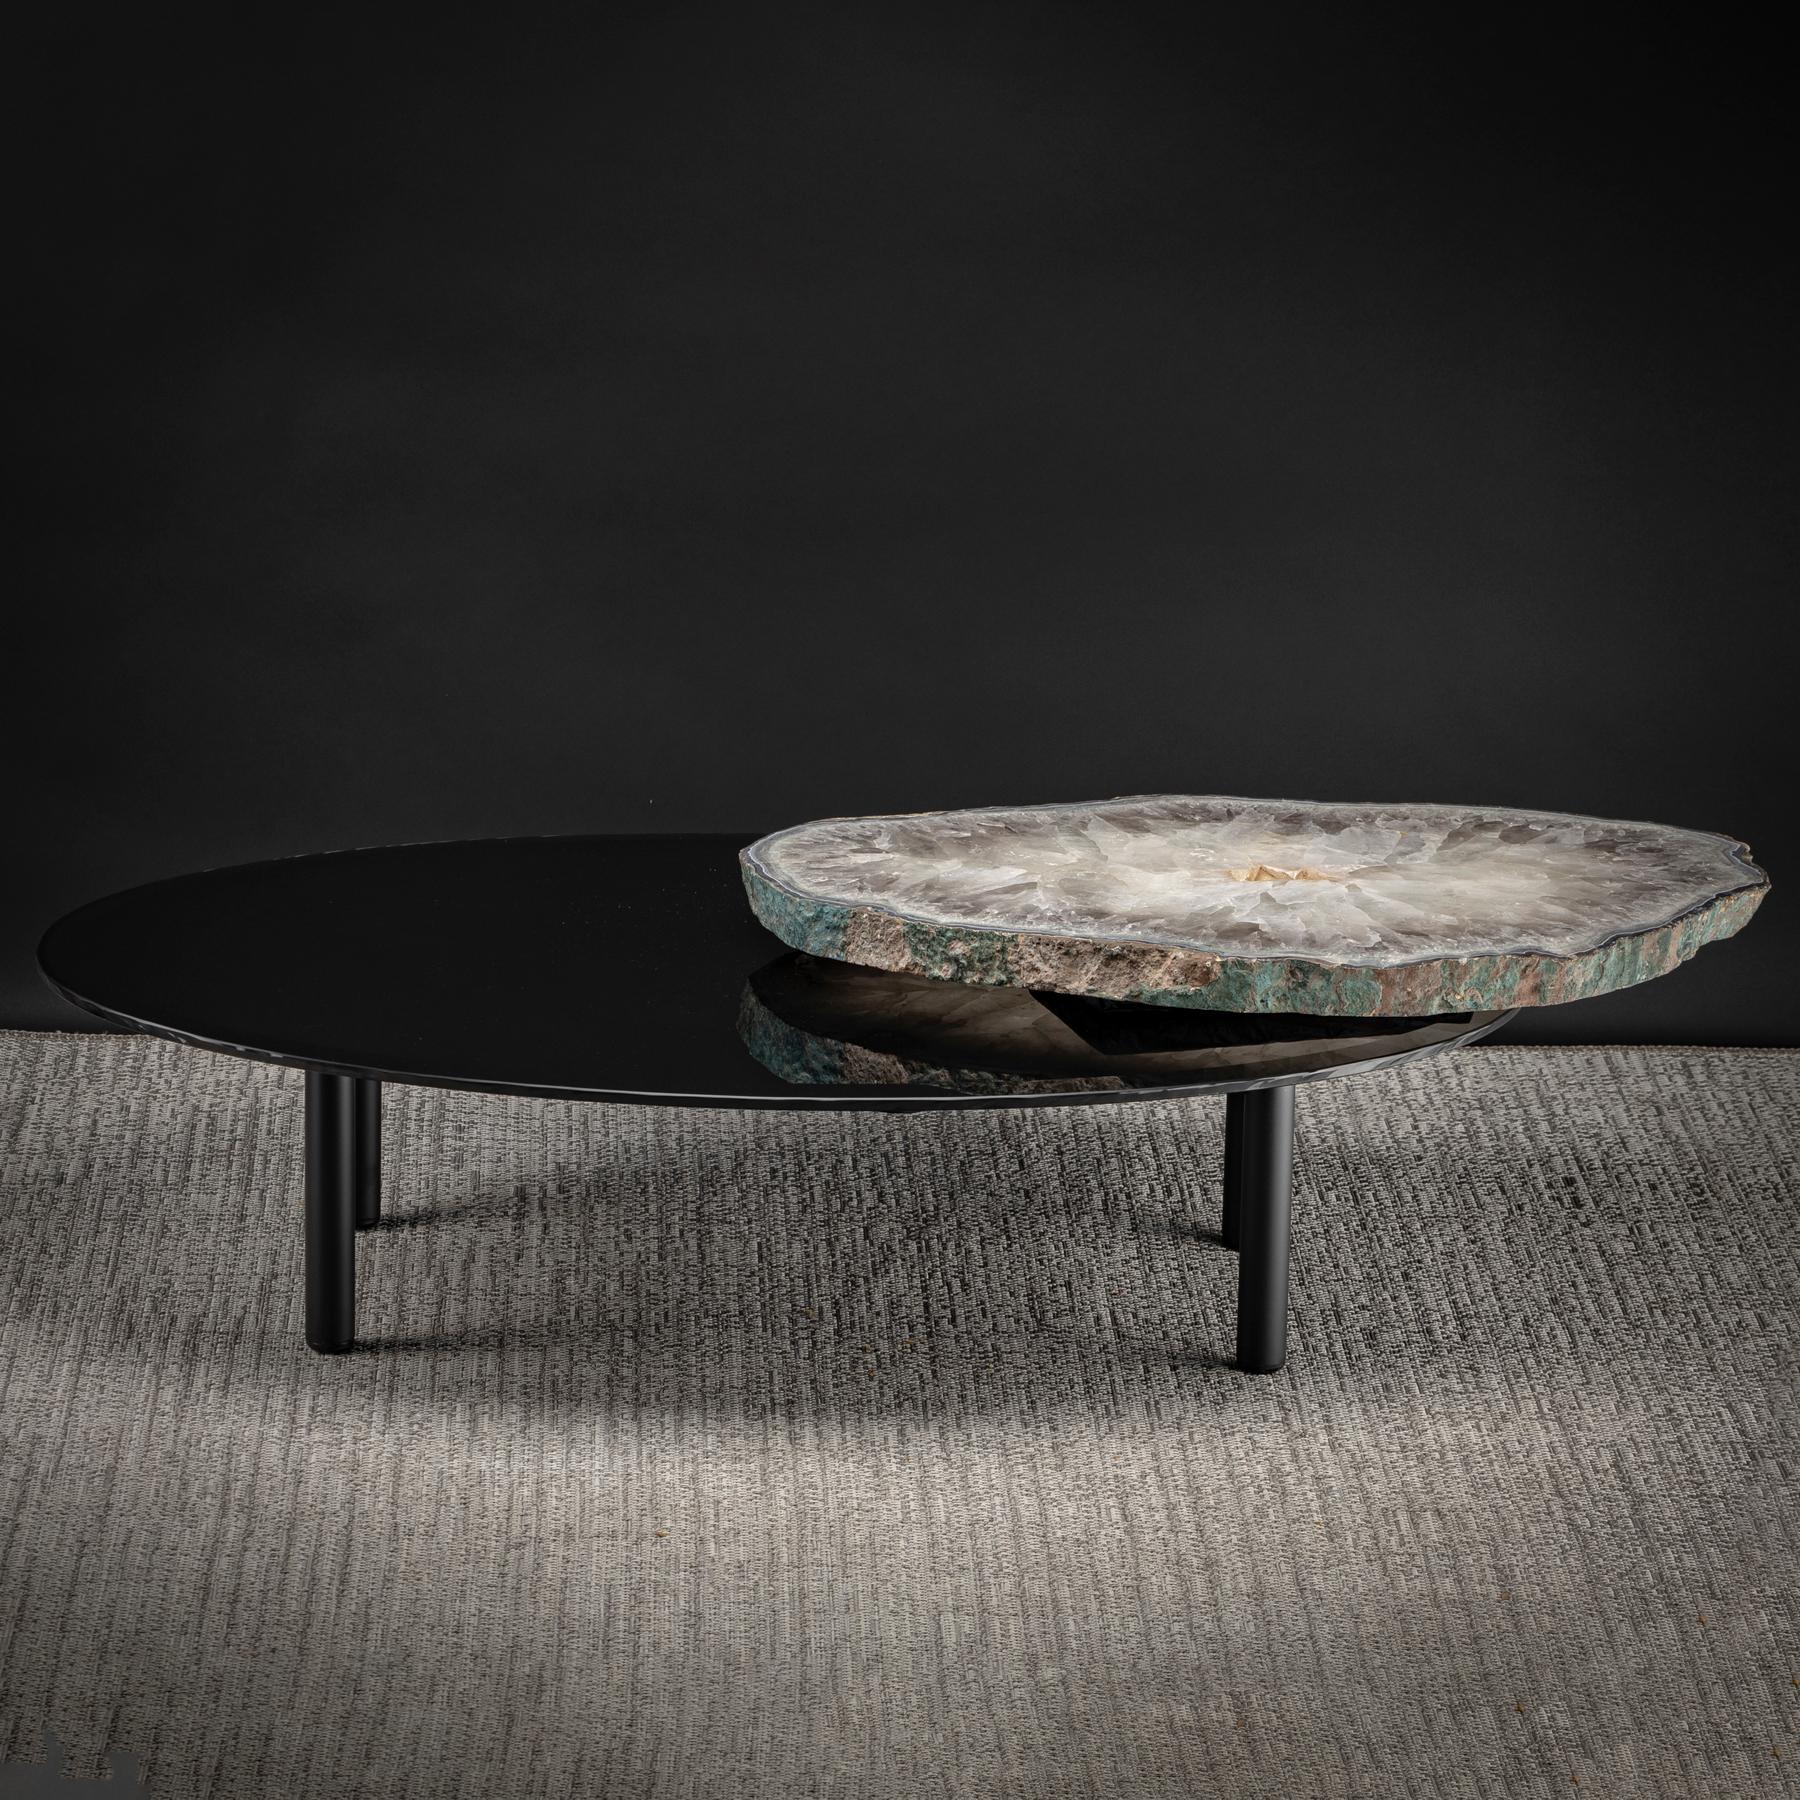 Center Table, with Rotating Brazilian Agate on Black Tempered Glass 4